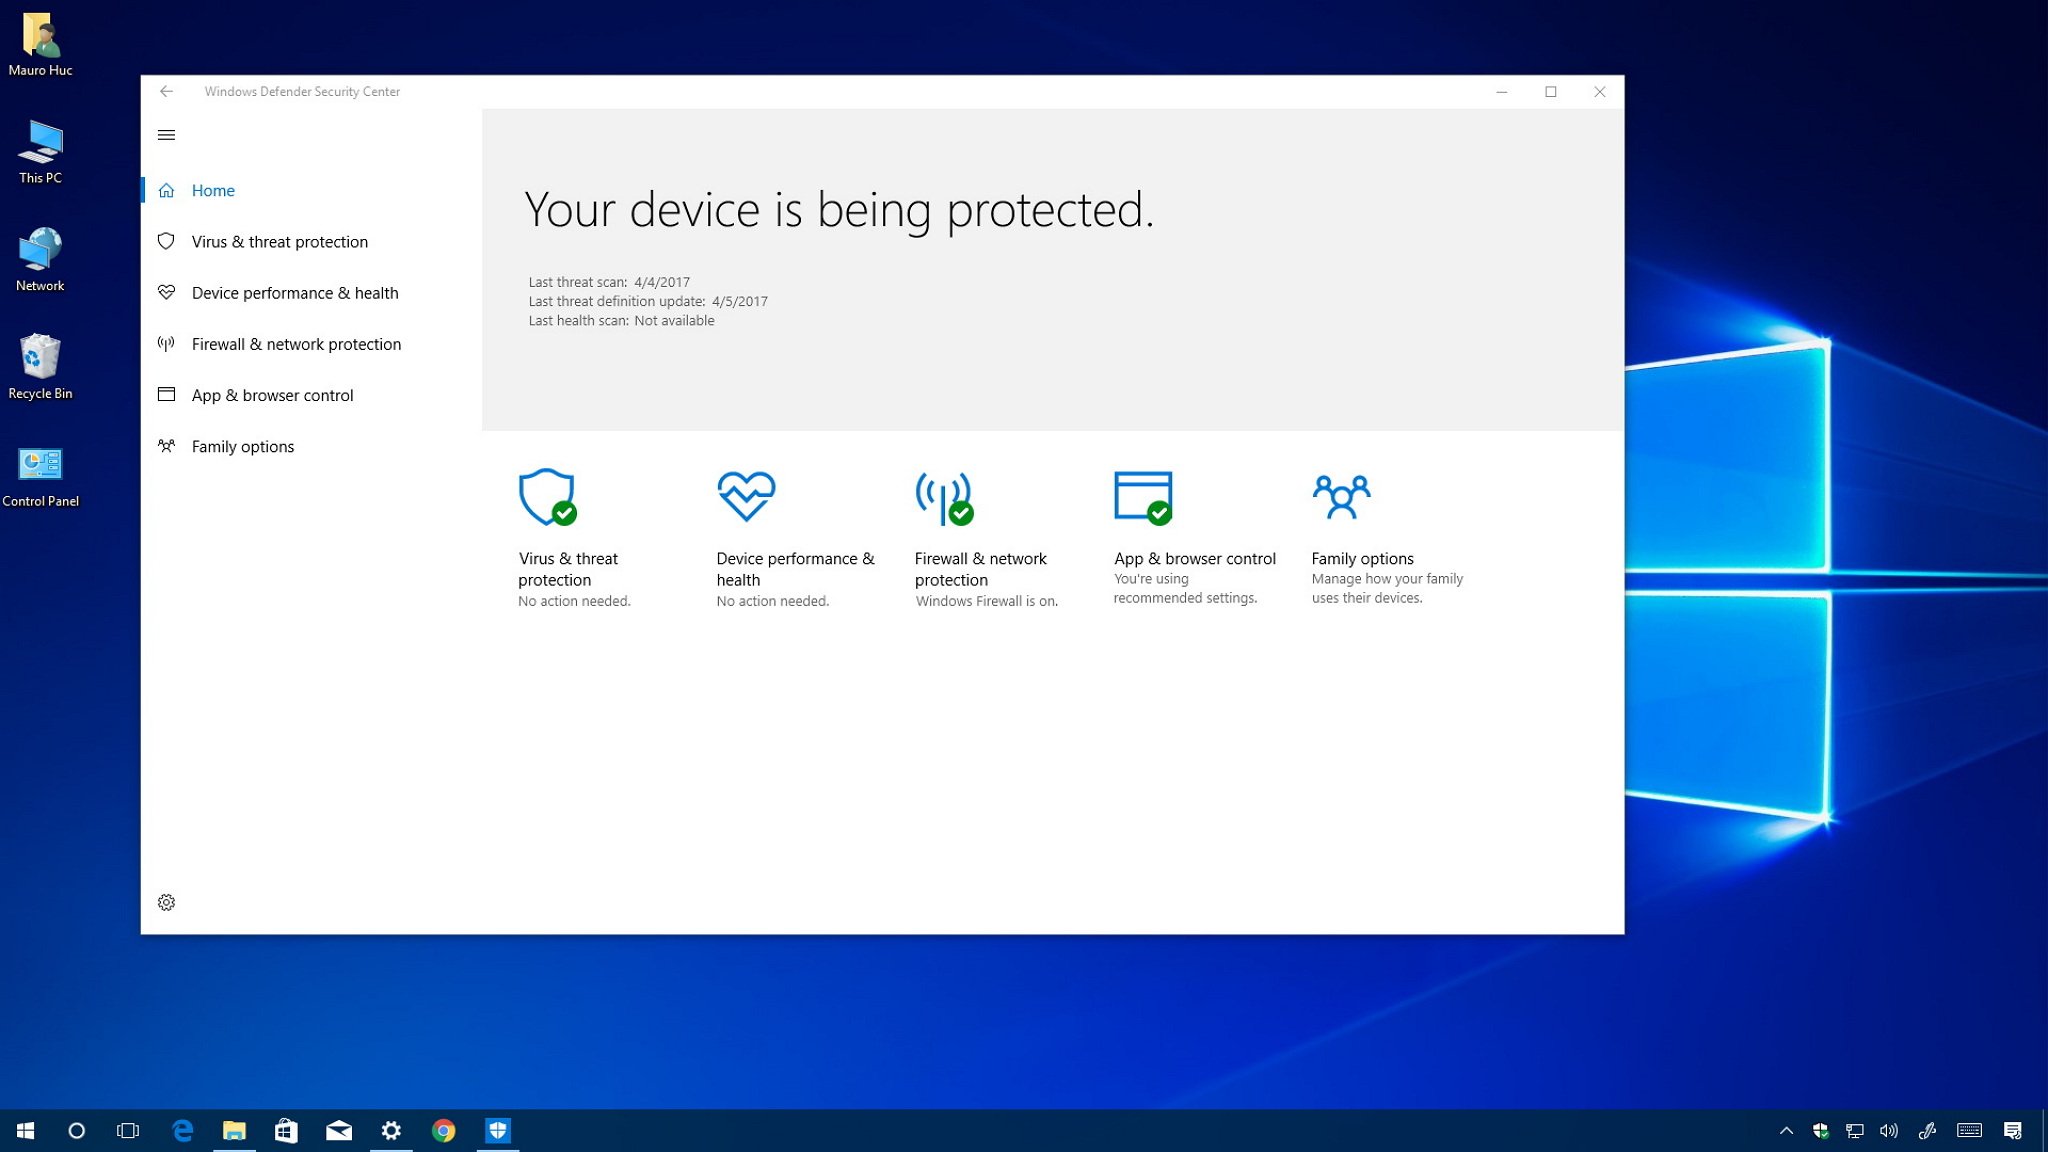 What you need to know about the new Windows Defender Security Center in